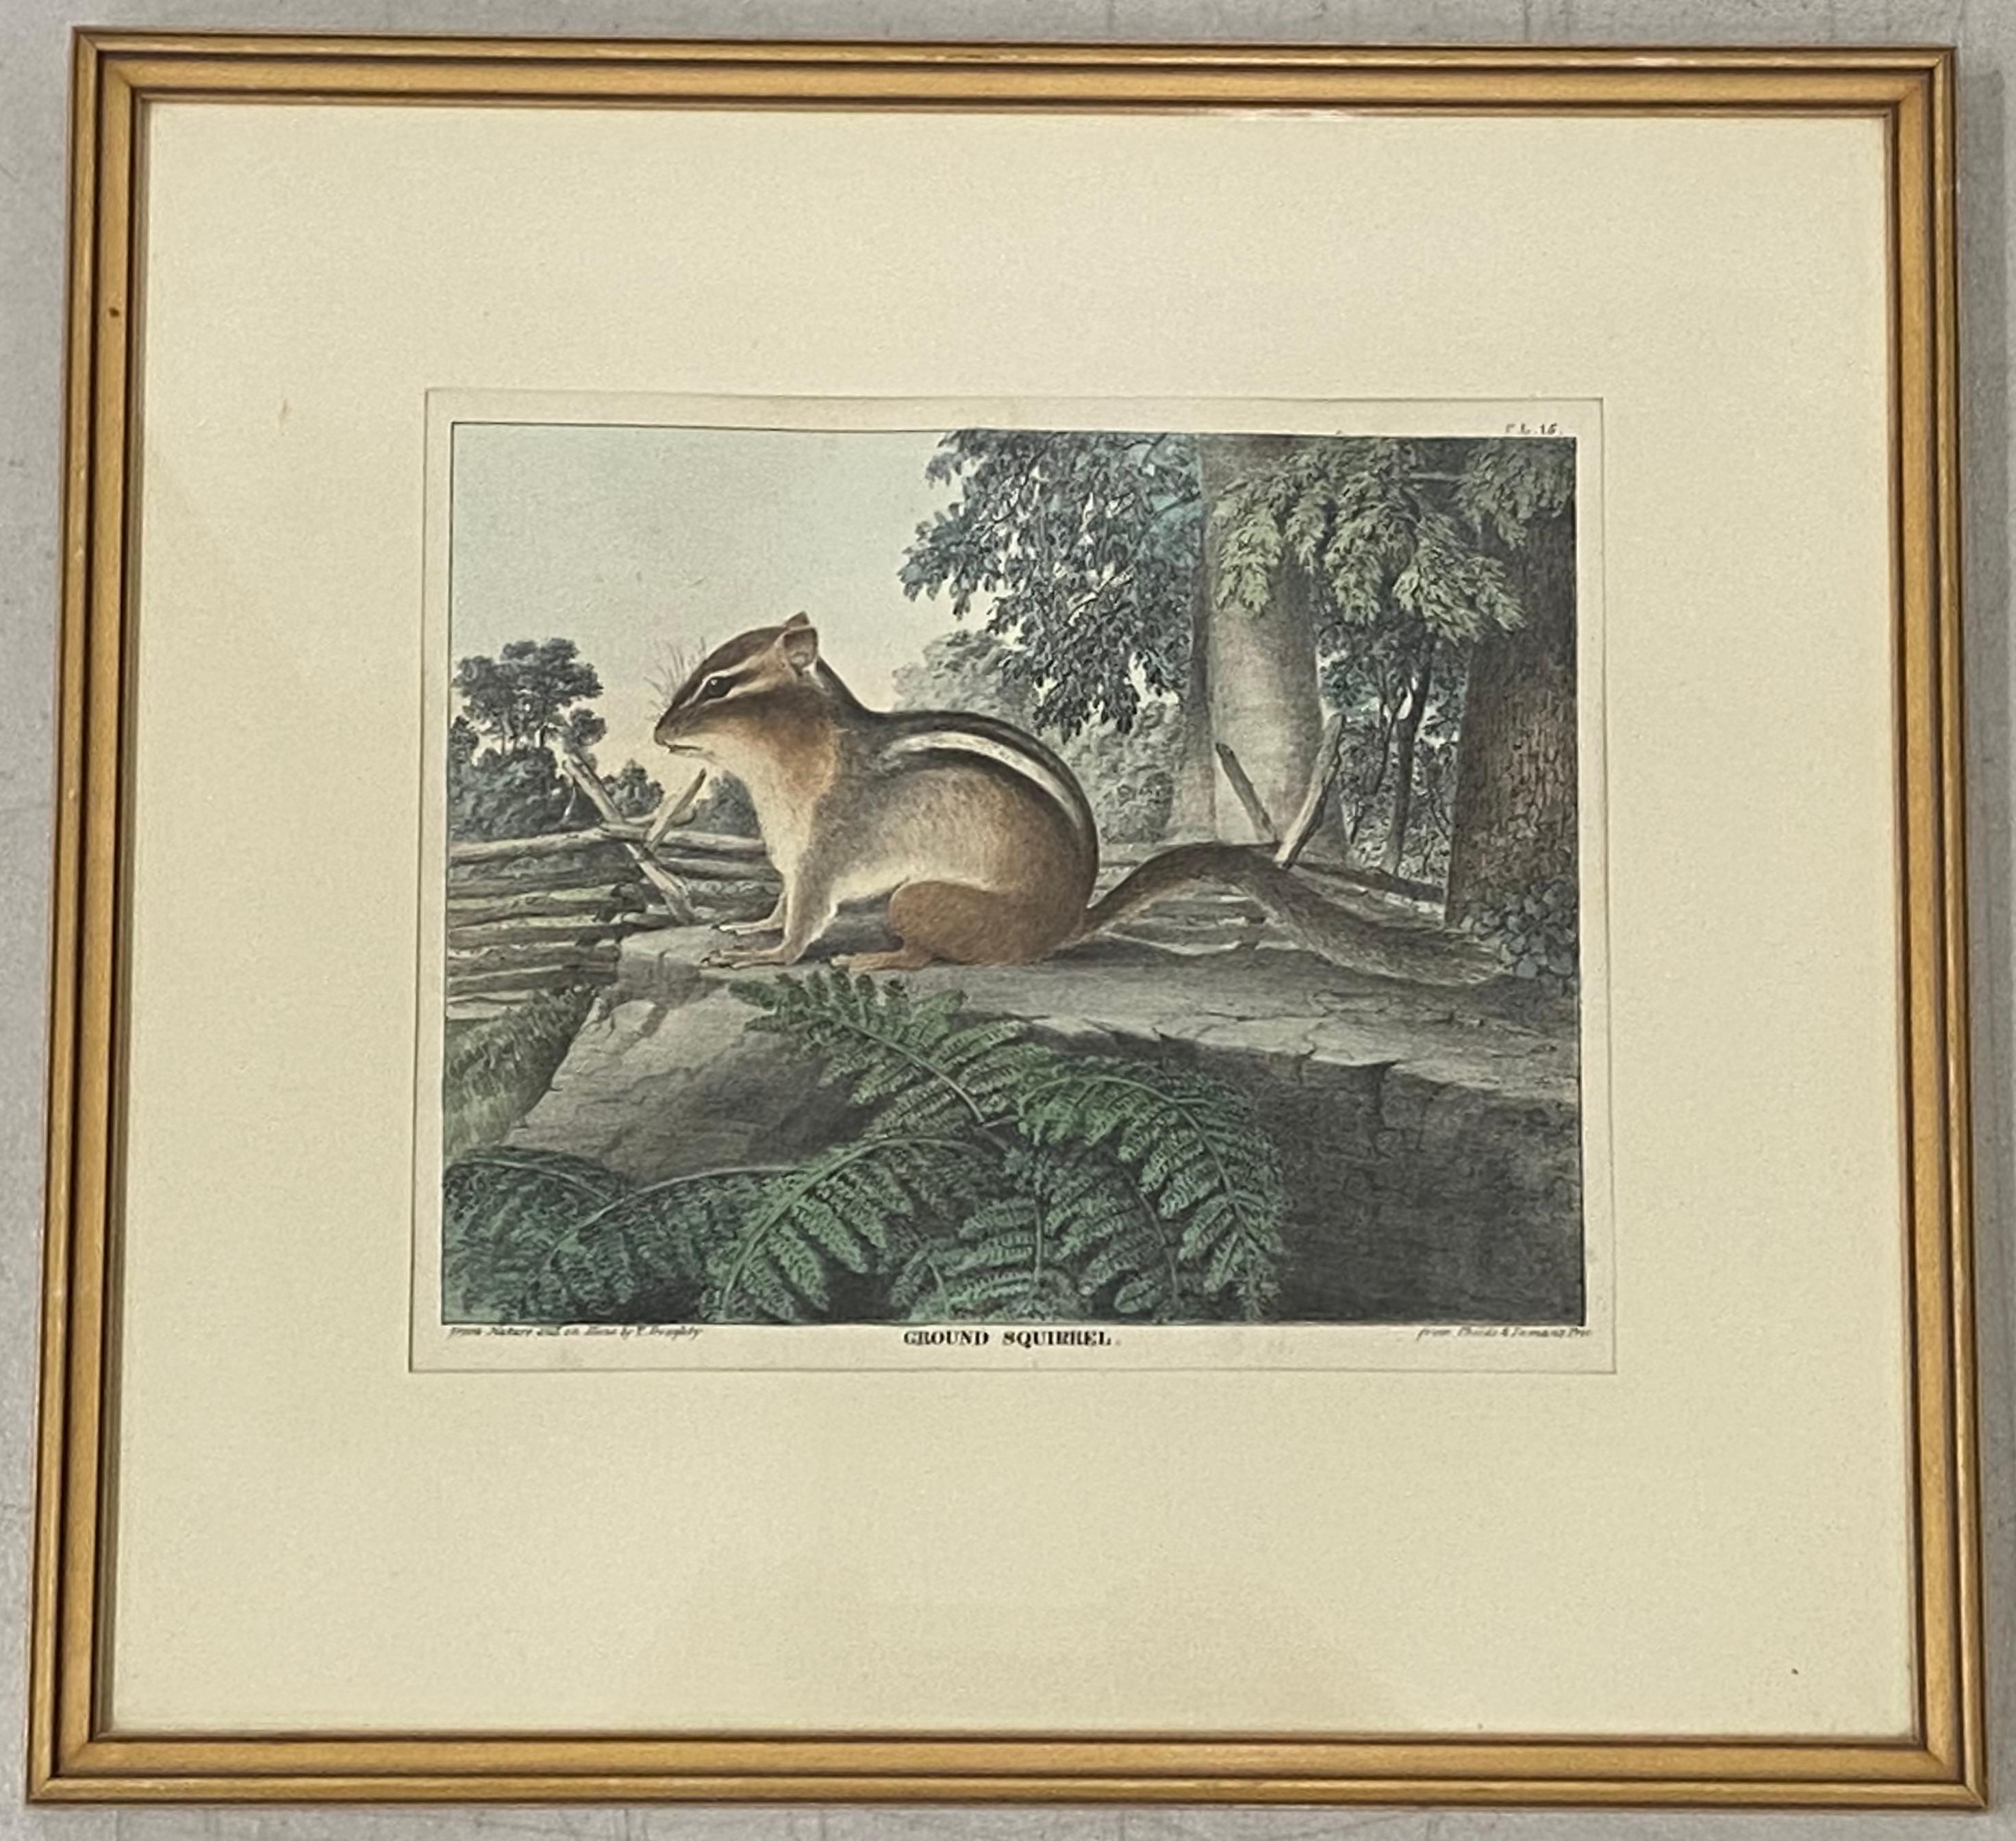 Unknown Animal Print - 19th Century "Ground Squirrel" Hand Colored Lithograph by T. Doughty C.1830s